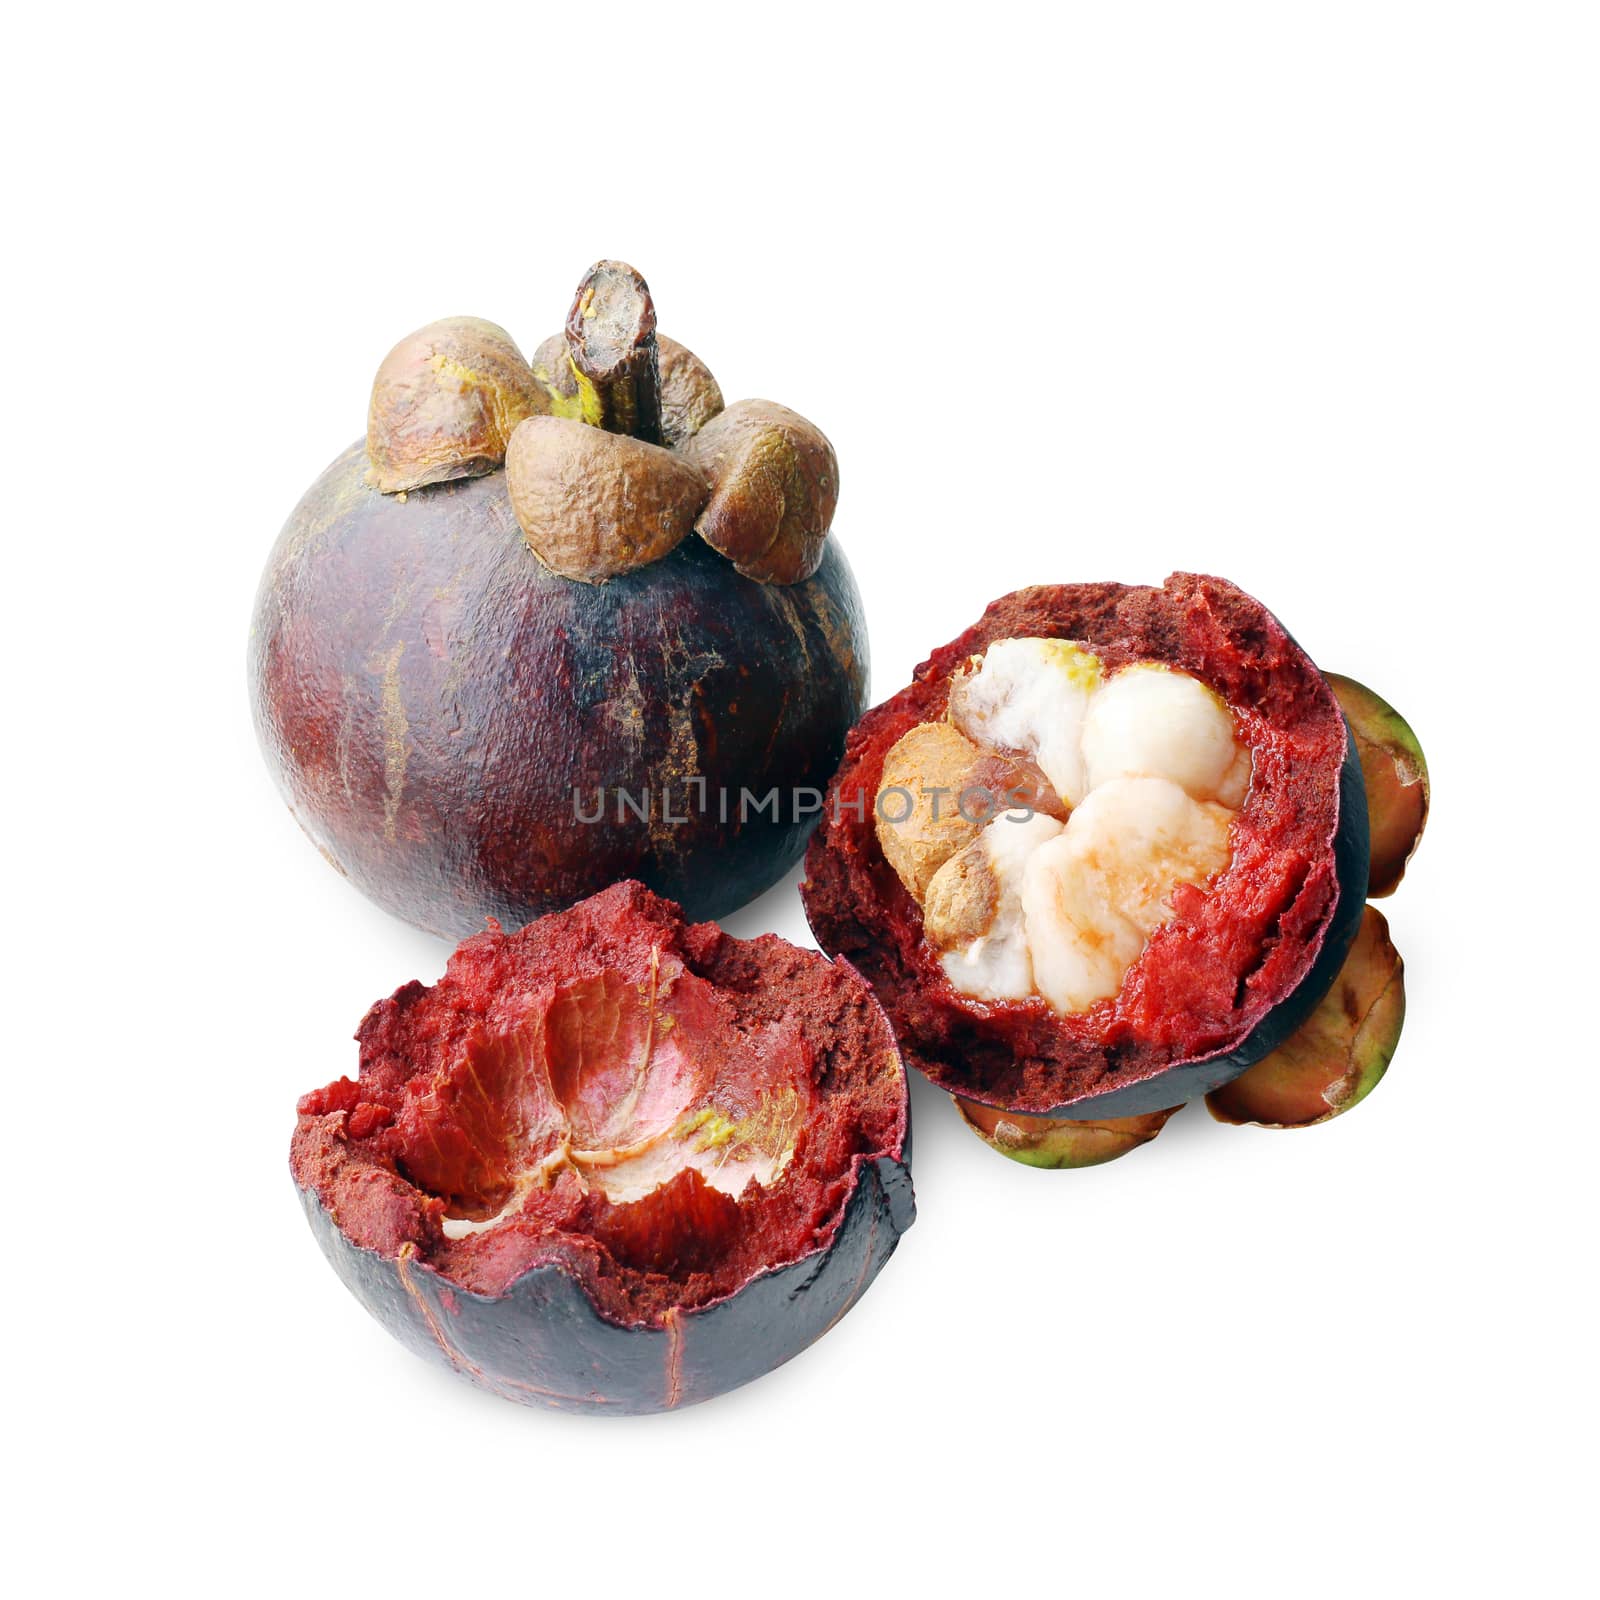 mangosteen fruit rotten close up, mangosteen rot and cut peel half on white background, ripe mangosteen fruit, waste from rot of mangosteen fruit by cgdeaw